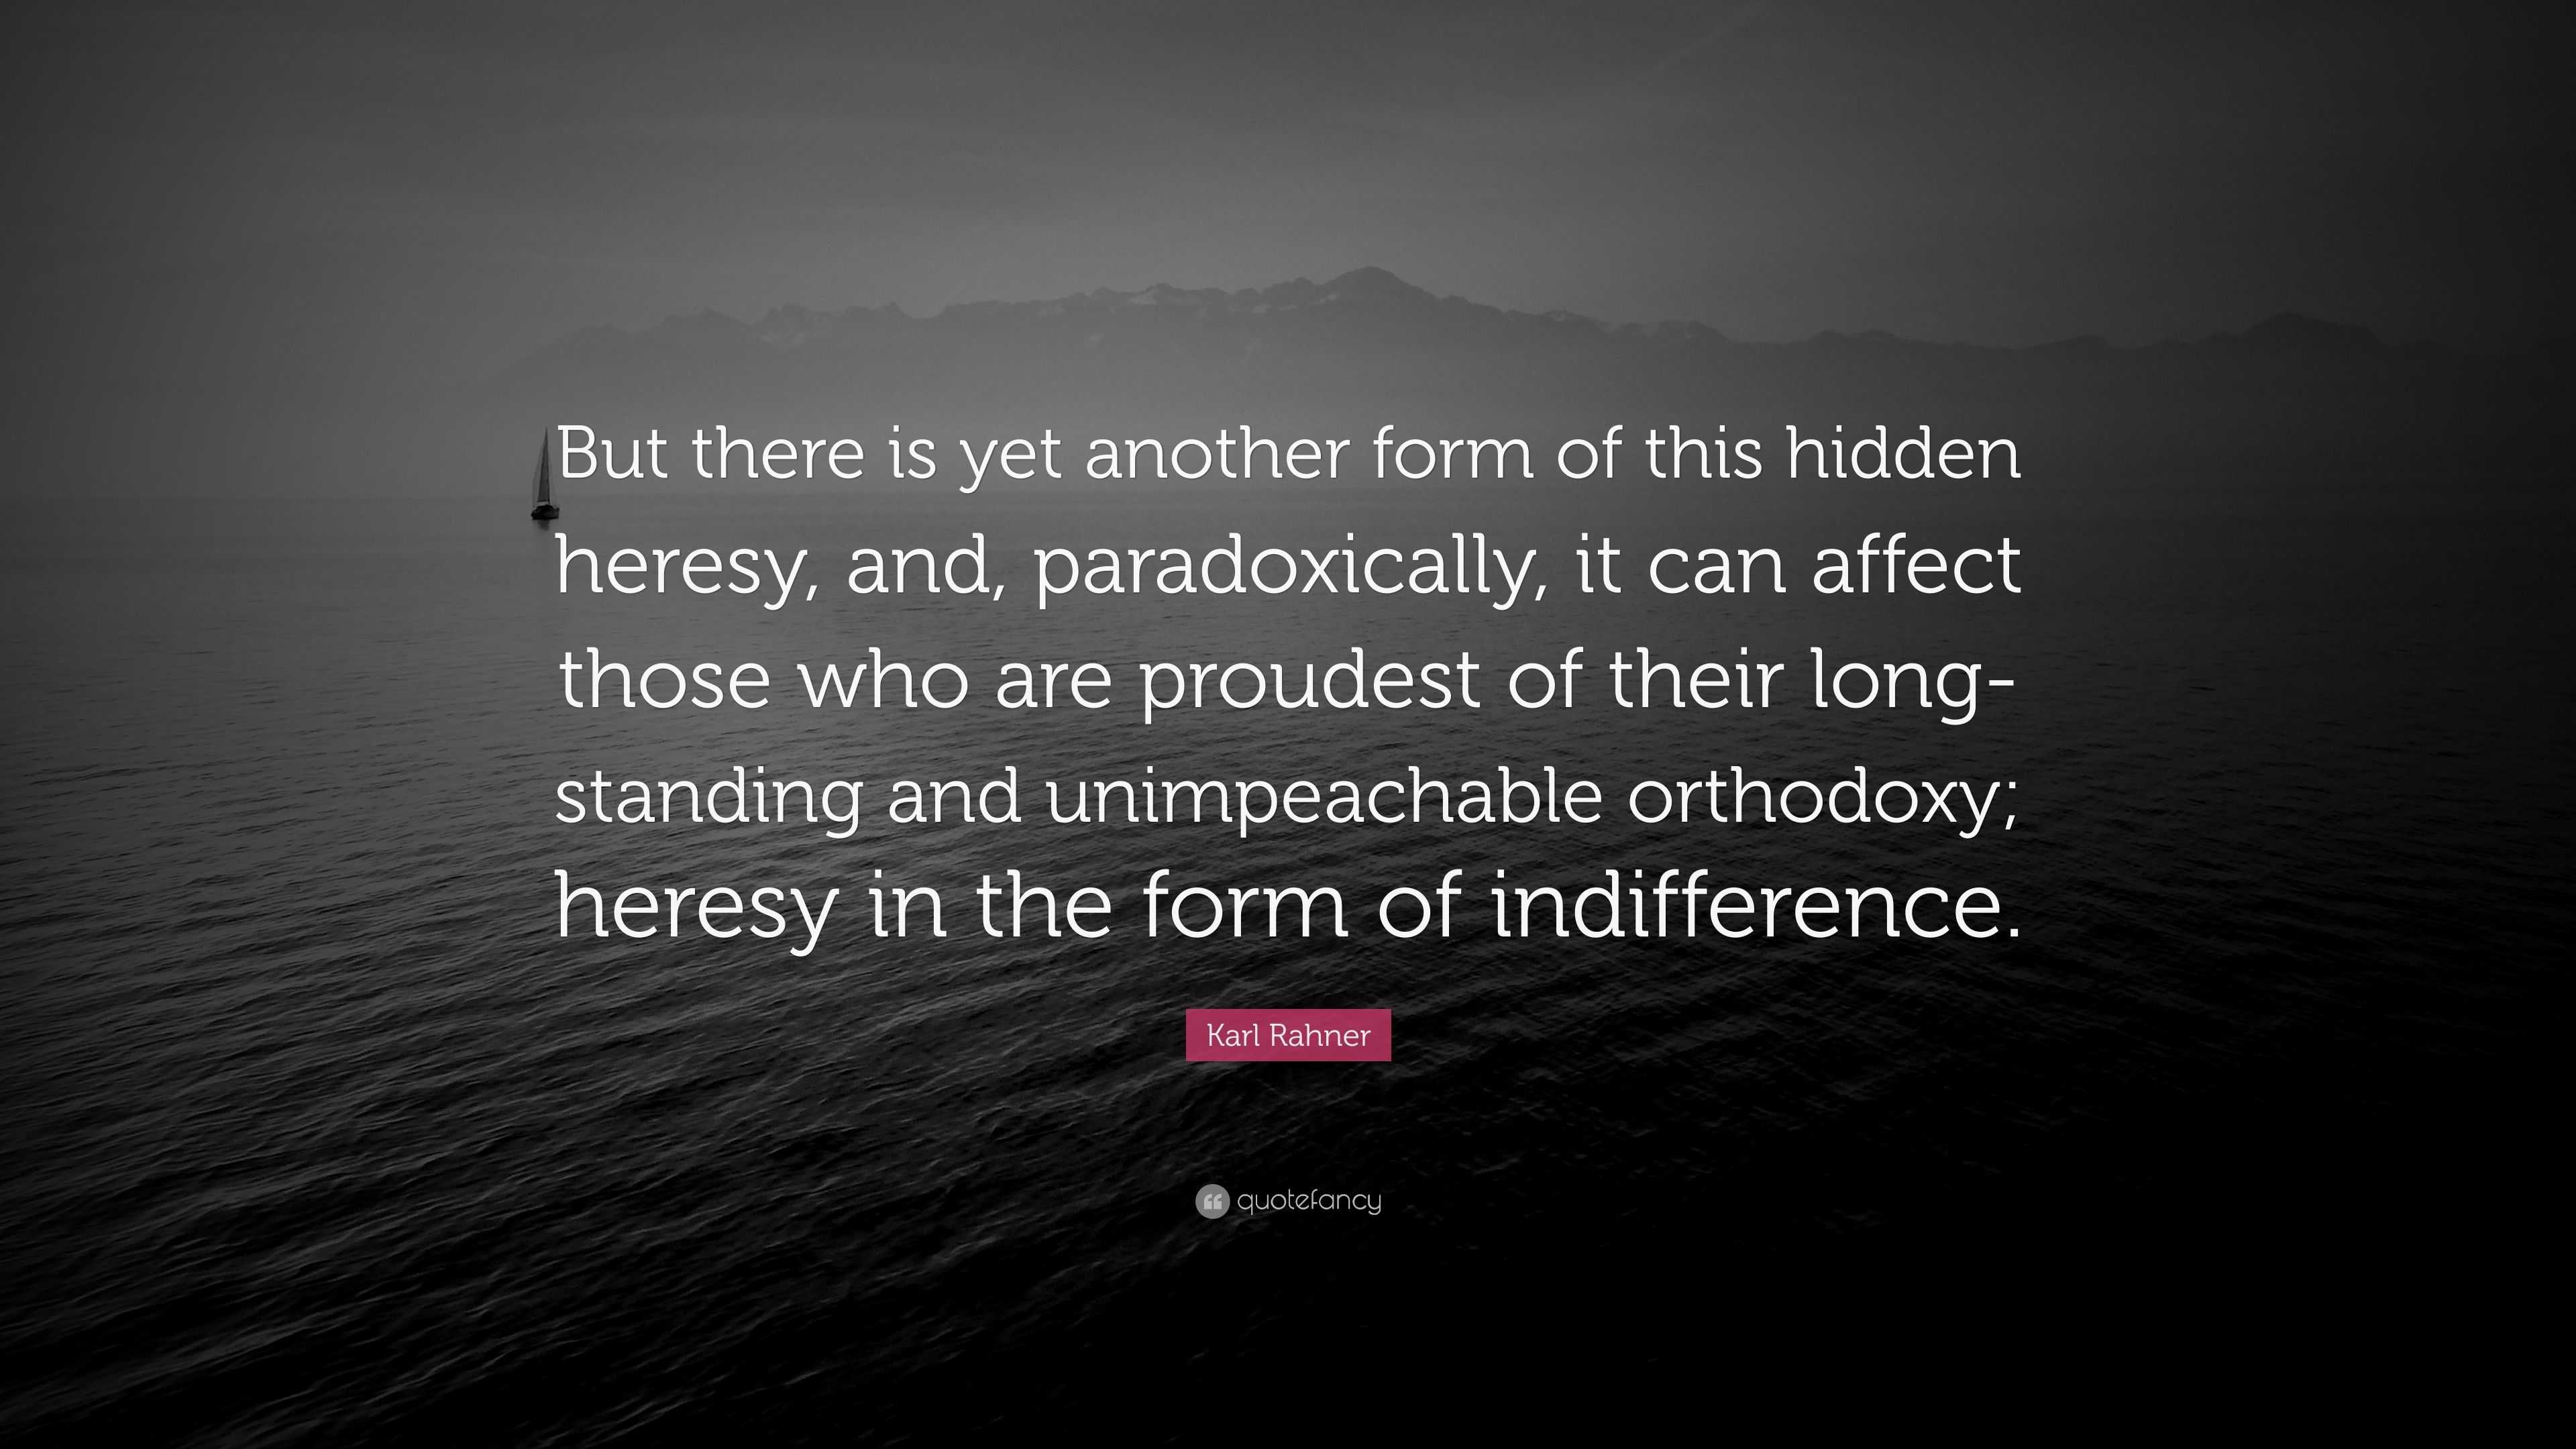 Karl Rahner Quote: “But there is yet another form of this hidden heresy ...